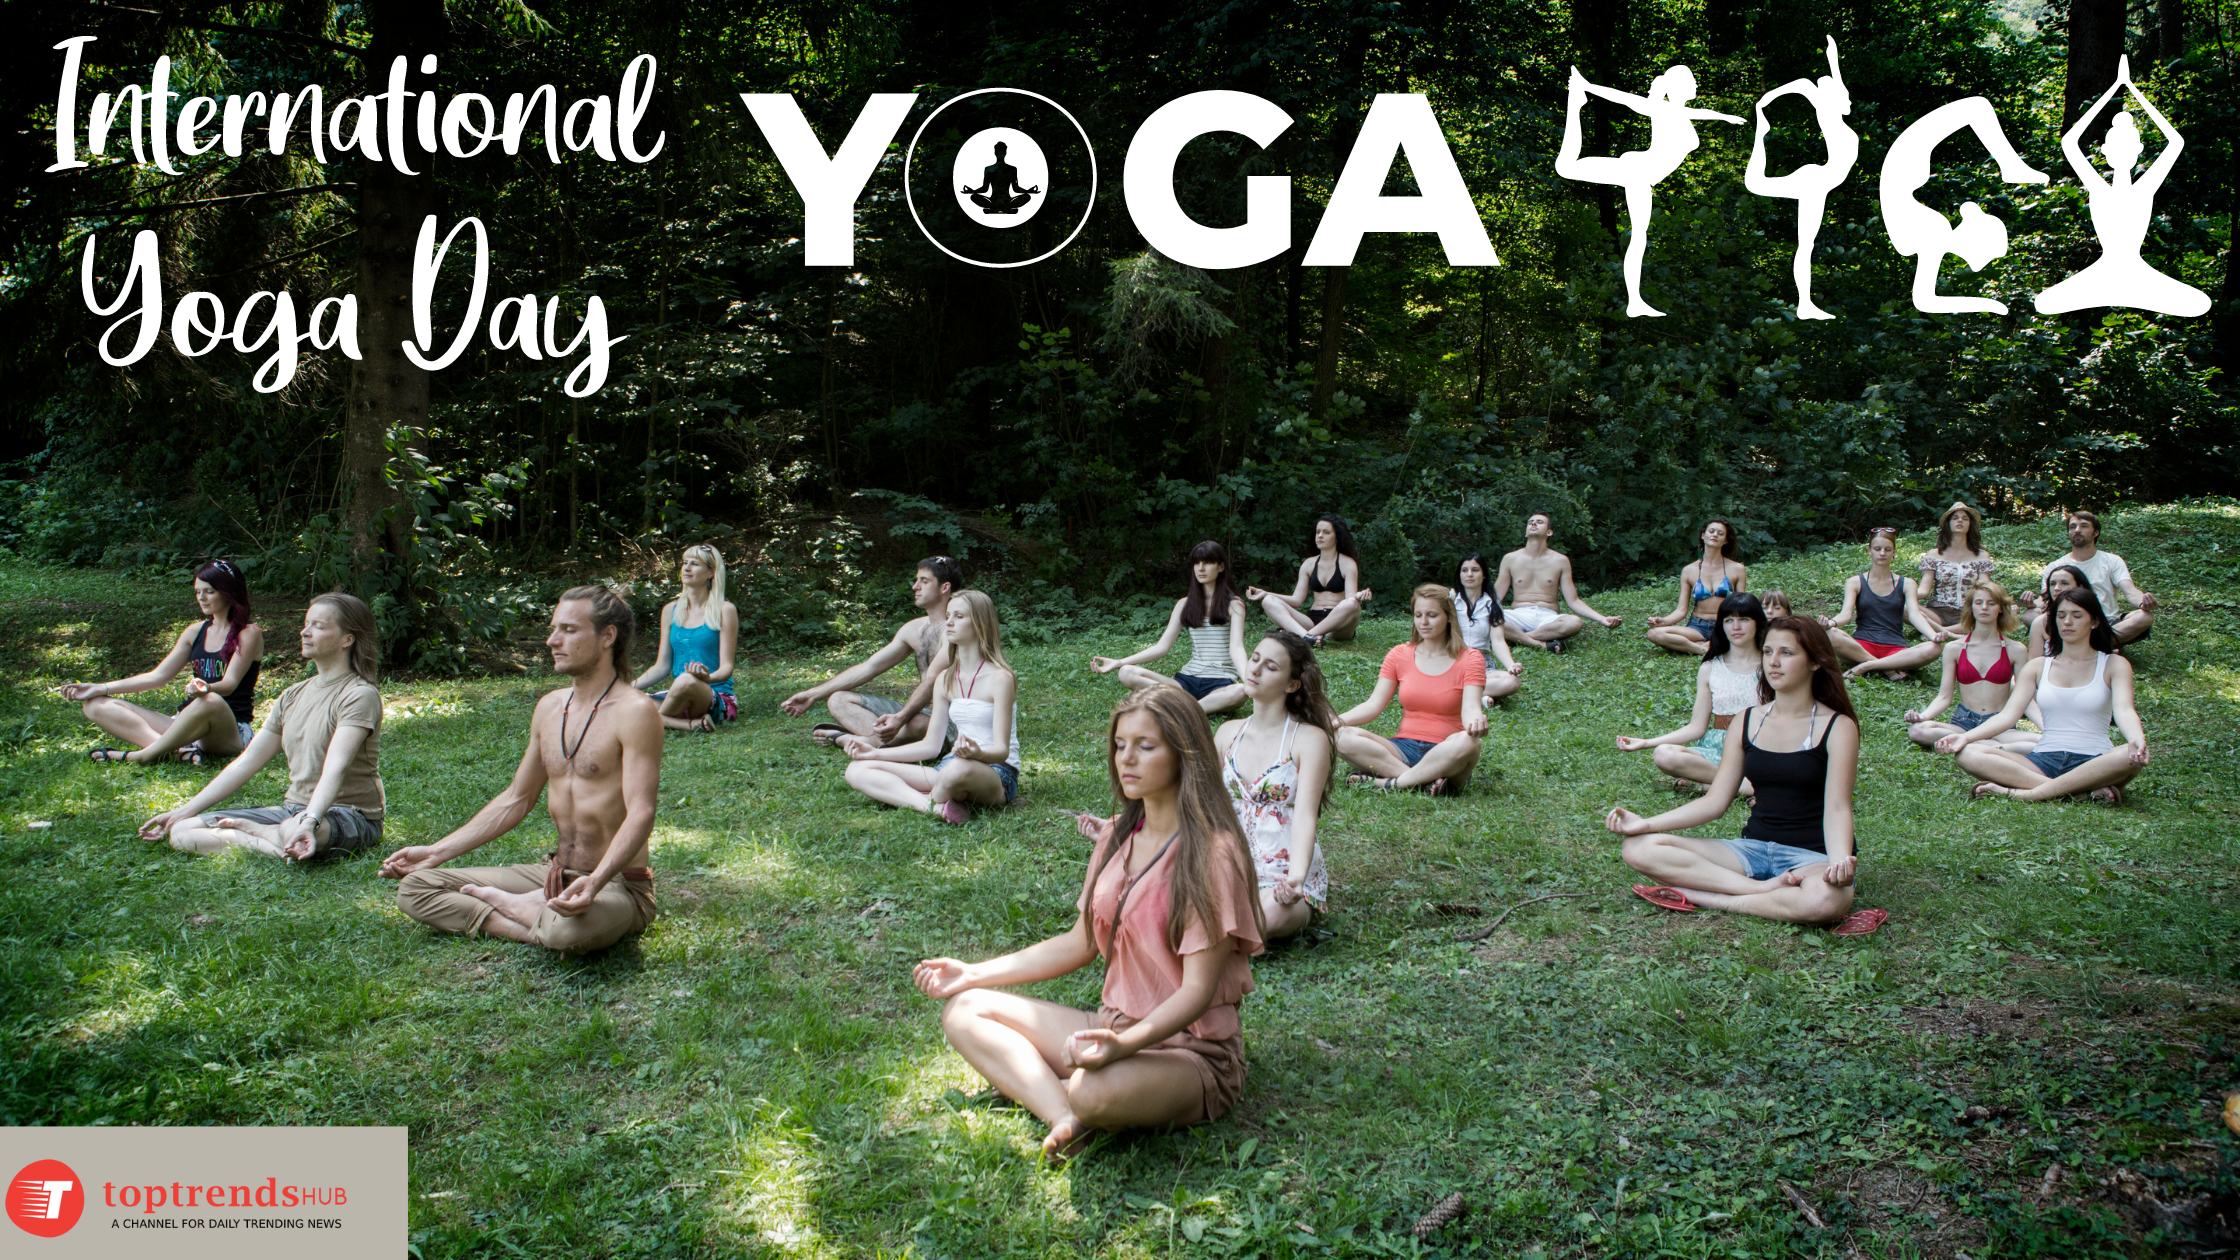 International Day of Yoga on June 21st: Transform Your Mind, Body, and Spirit